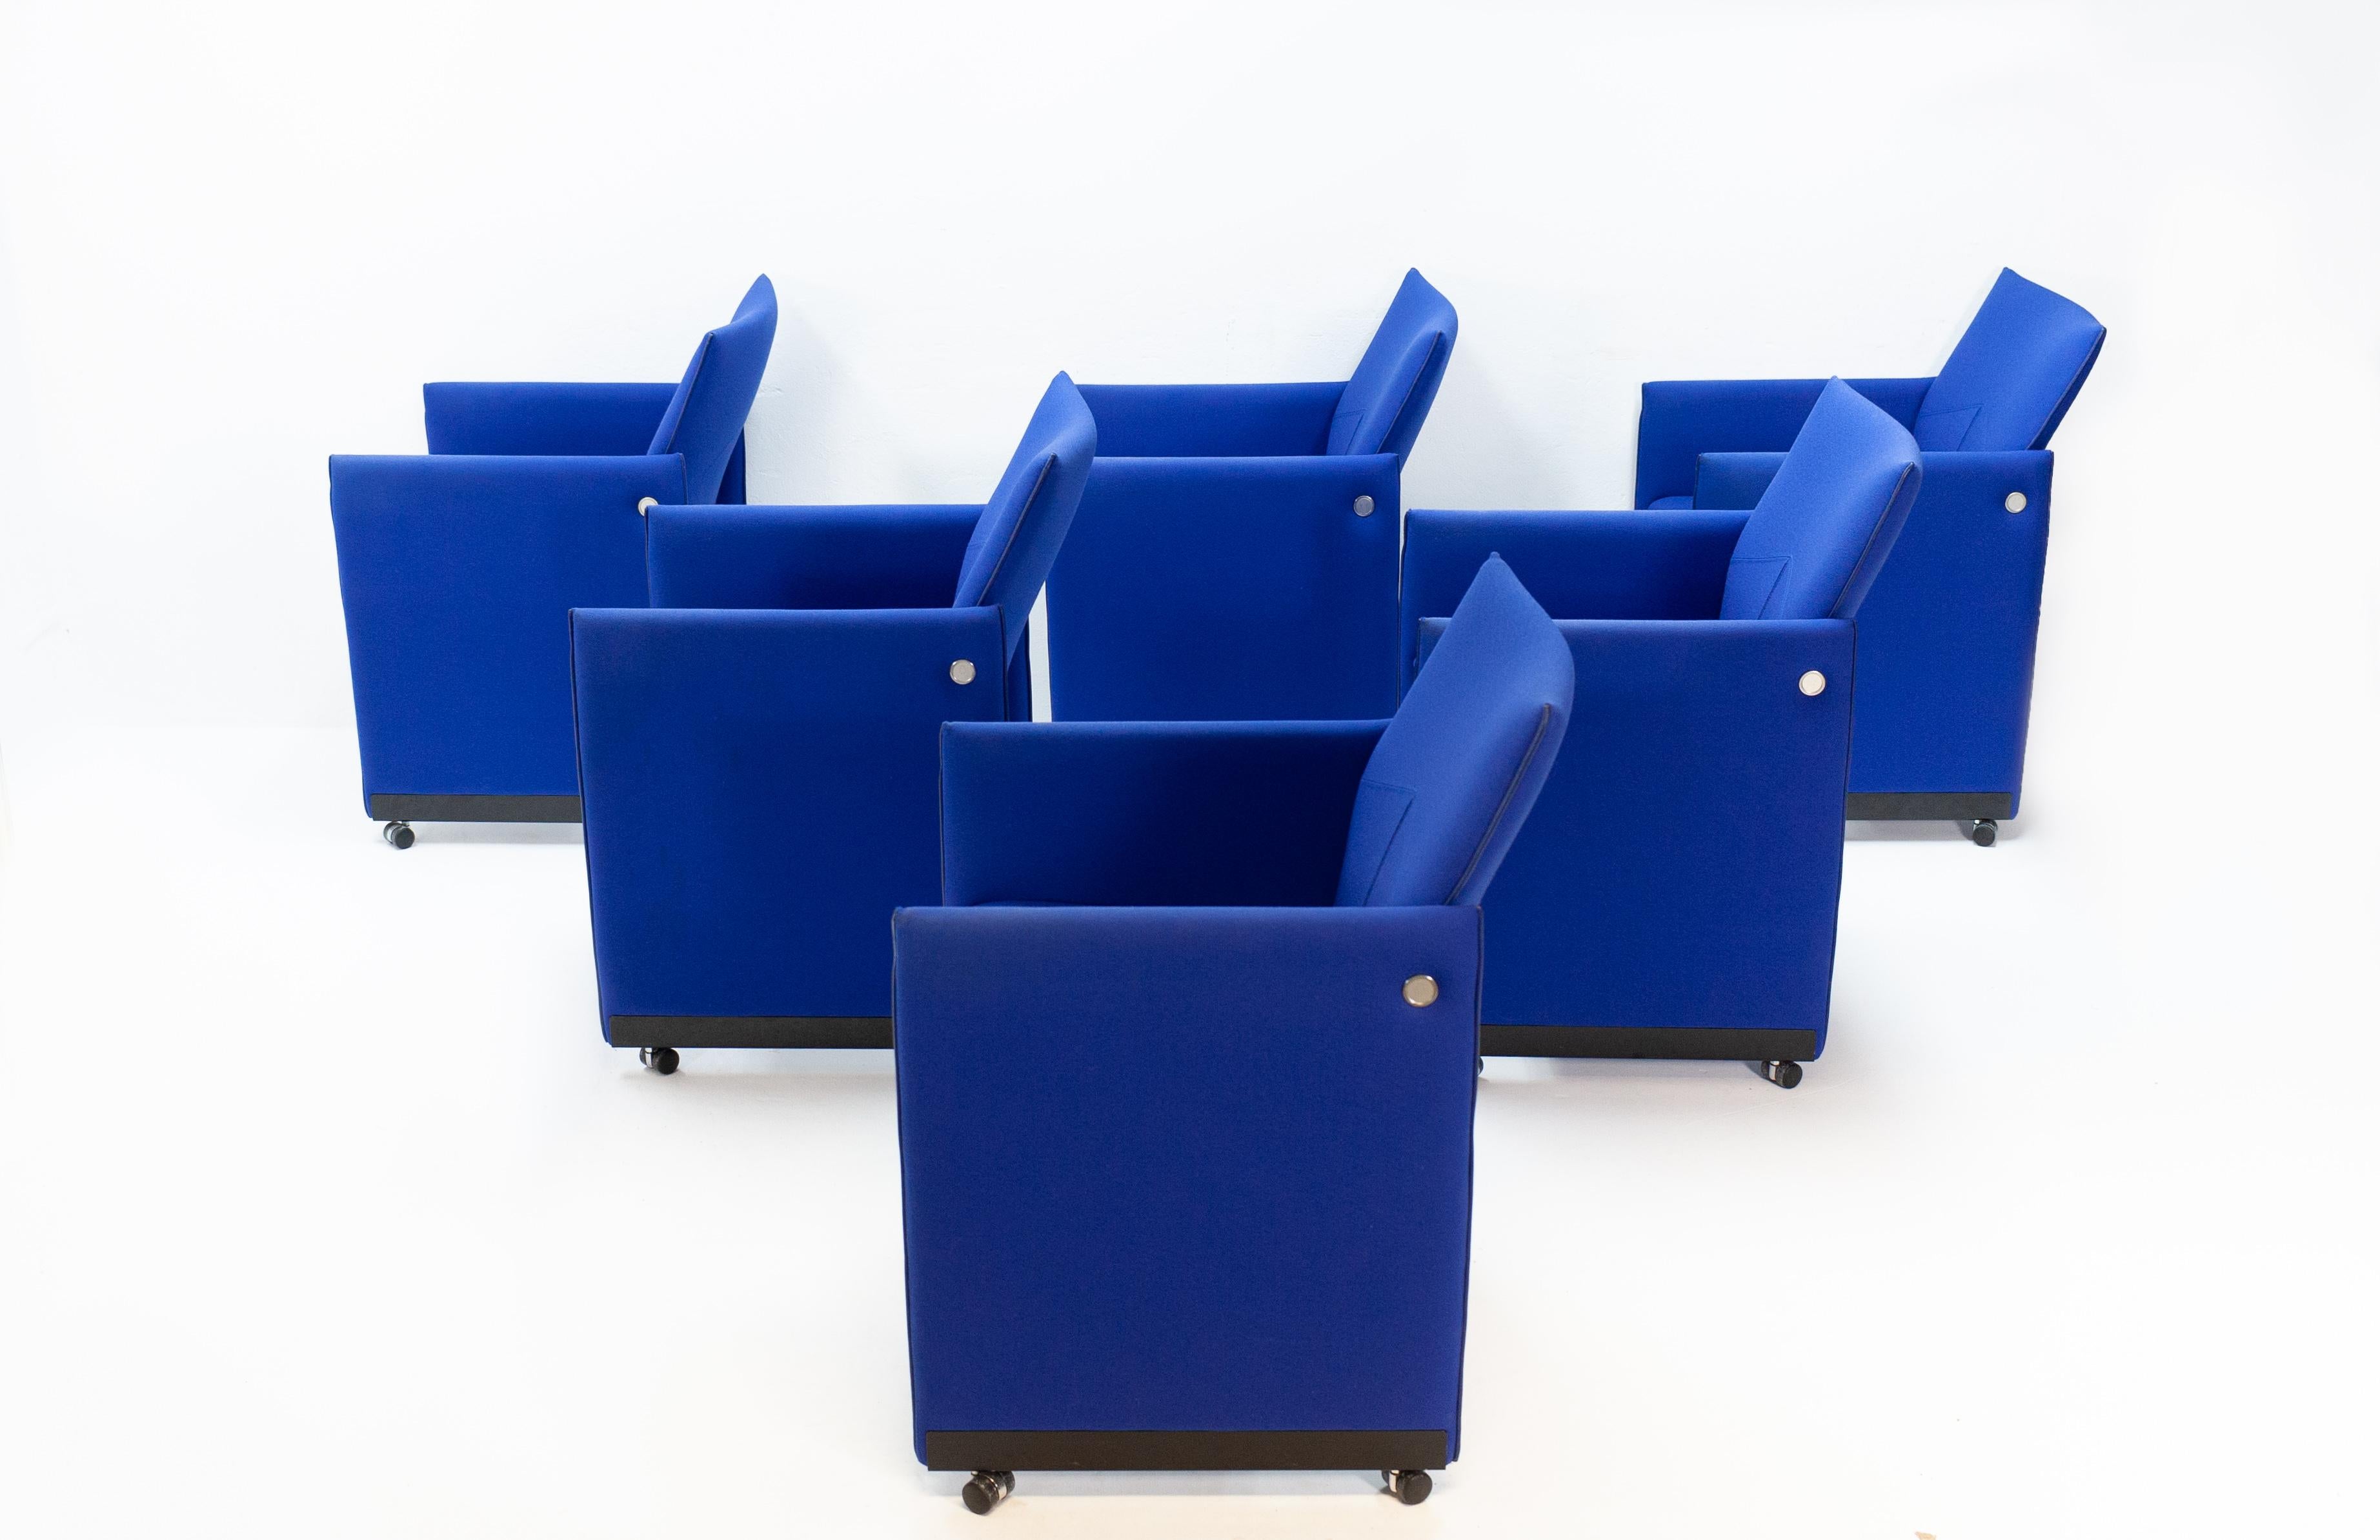 Six Artifort dining chairs or office chairs. Design Geoffrey Harcourt, 1996. In a cobalt blue fabric. Completed with a leather rim. On wheels. Good condition.

Good design by this famous France designer. Very good seating comfort. 600 euro a